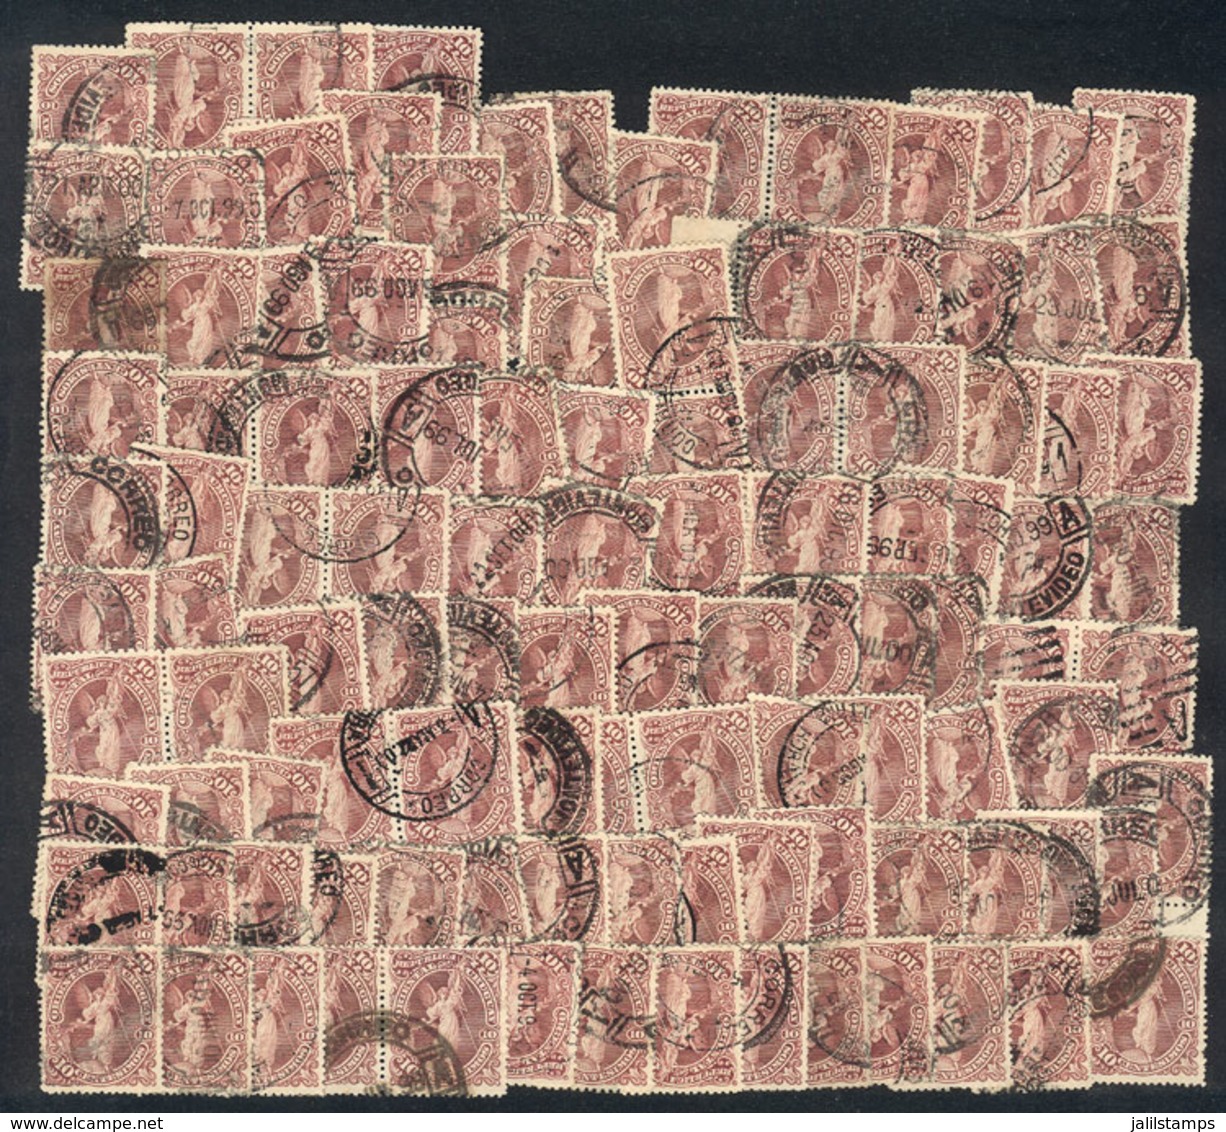 URUGUAY: Yvert 149, Lot Of More Than 110 Used Stamps Of VF Quality, Perfect Lot To Look For Varieties And Good Cancels,  - Uruguay